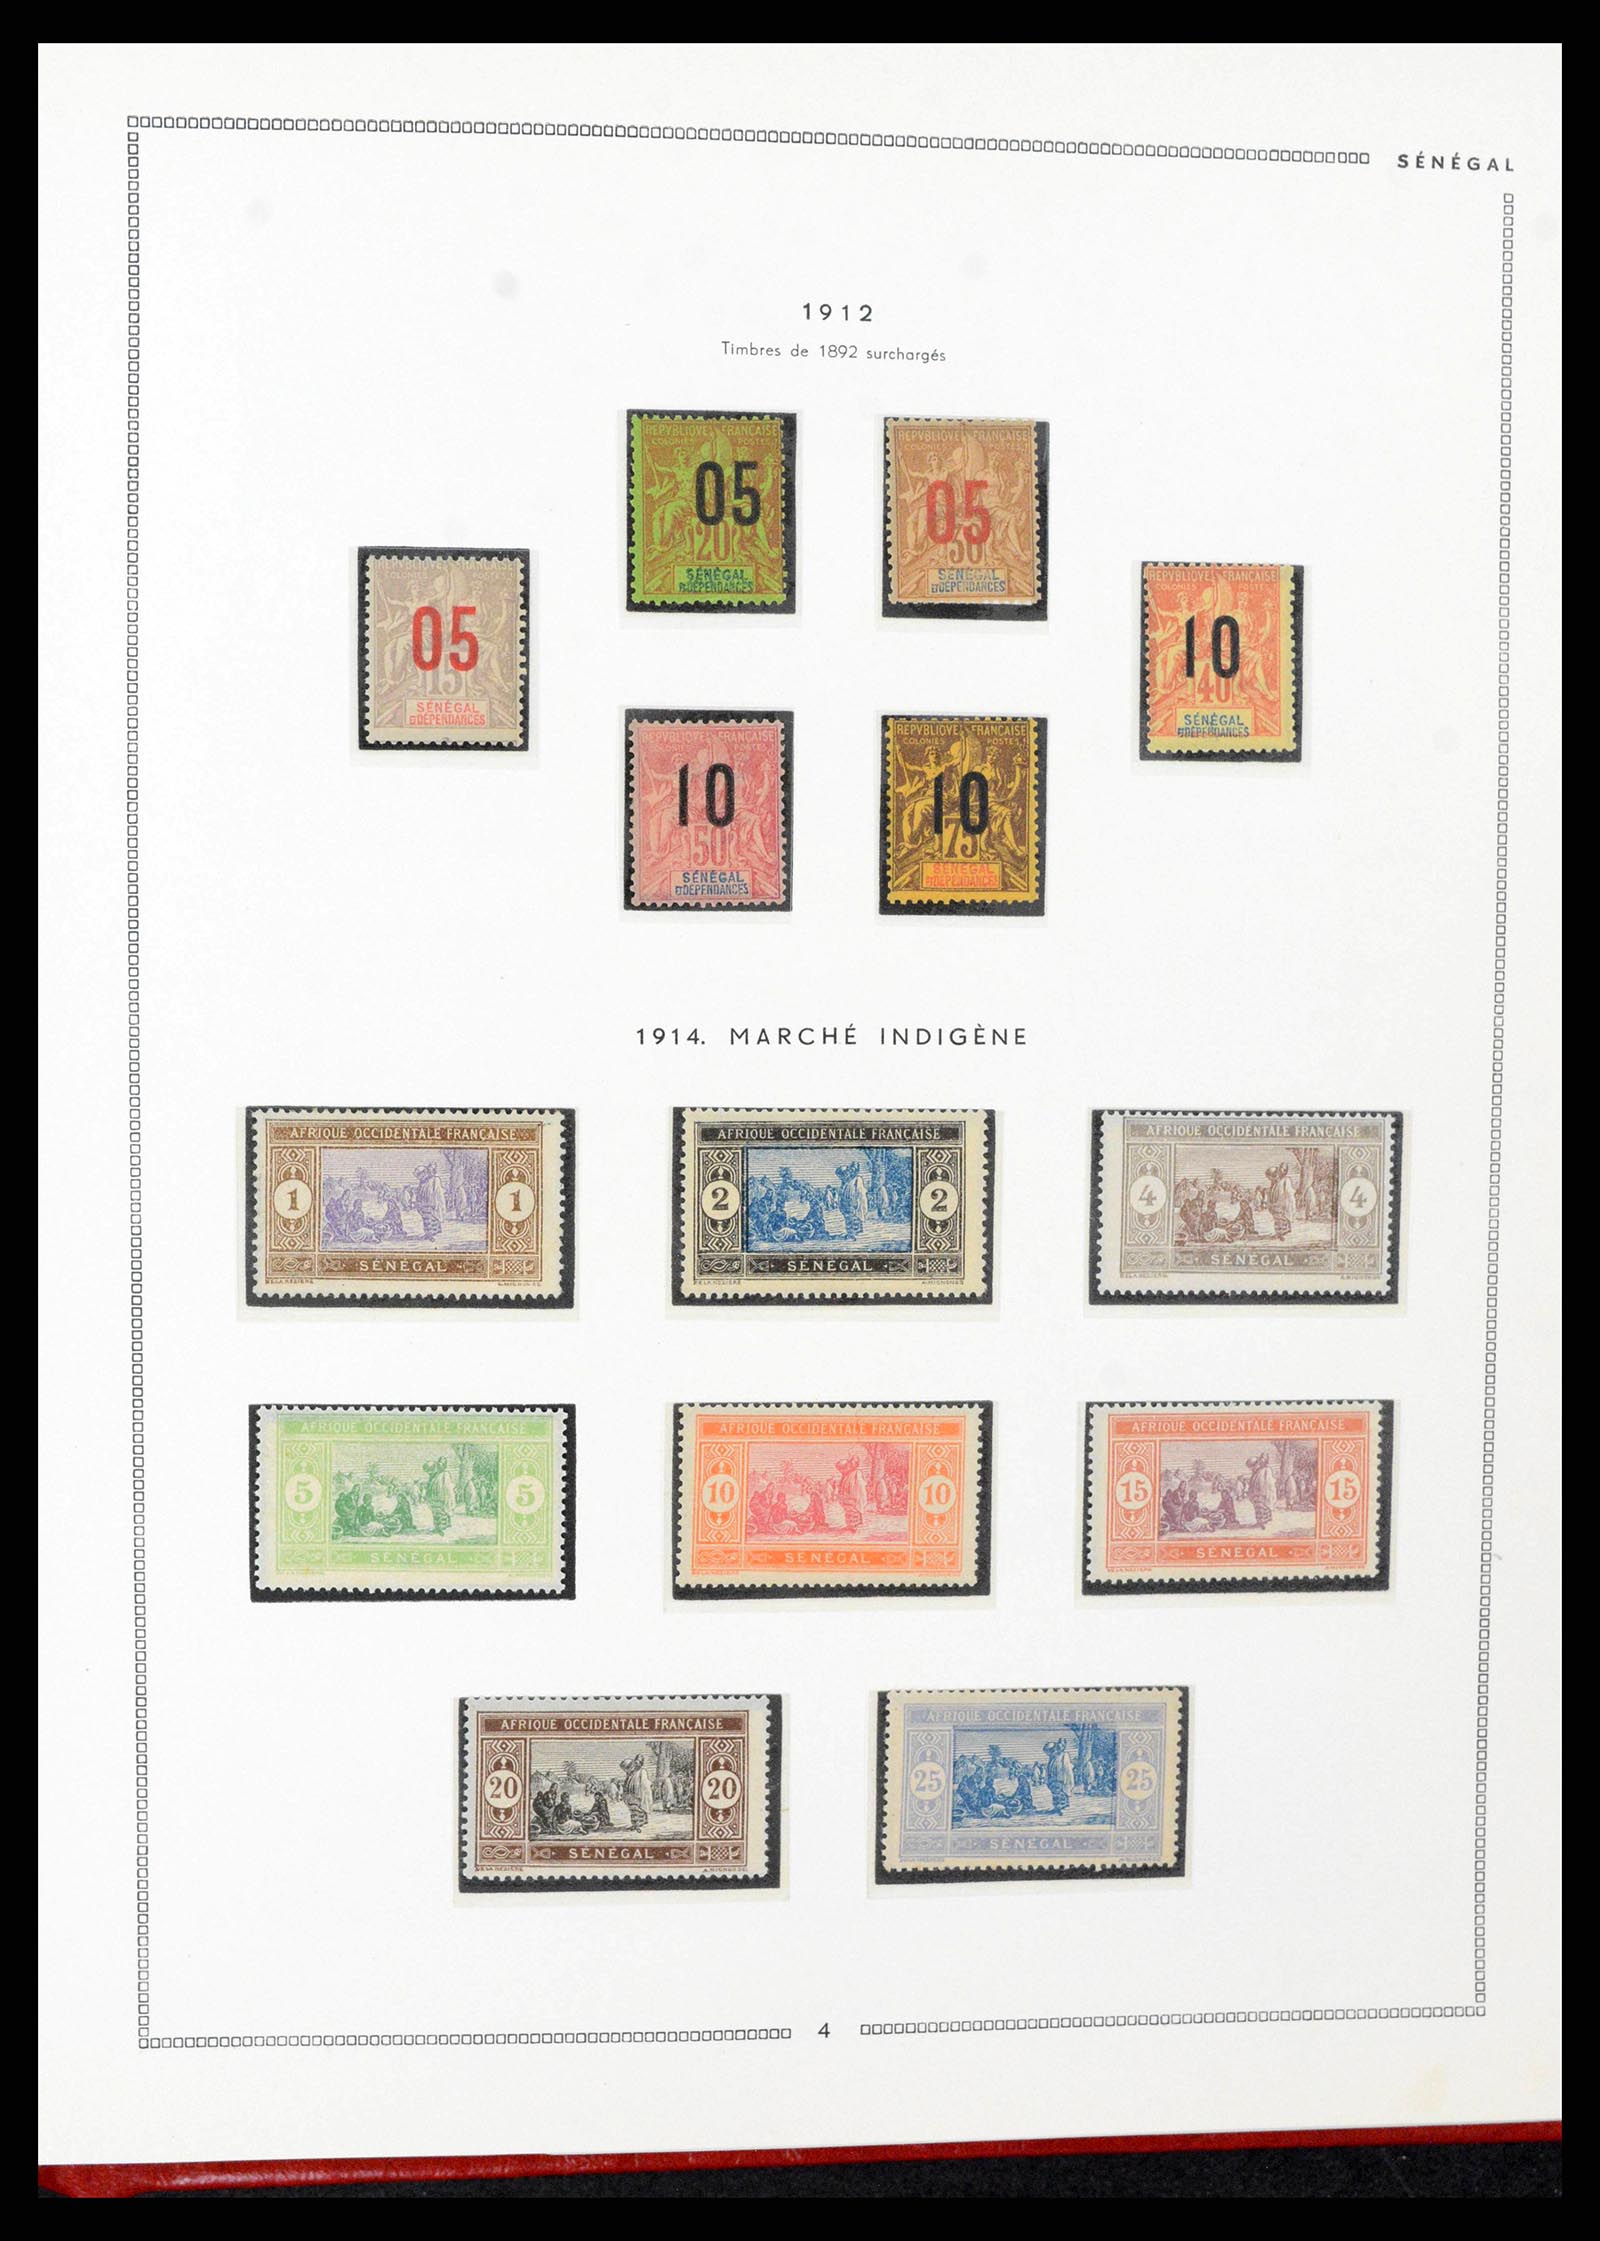 38385 0060 - Stamp collection 38385 French Colonies supercollection 1859-1975.